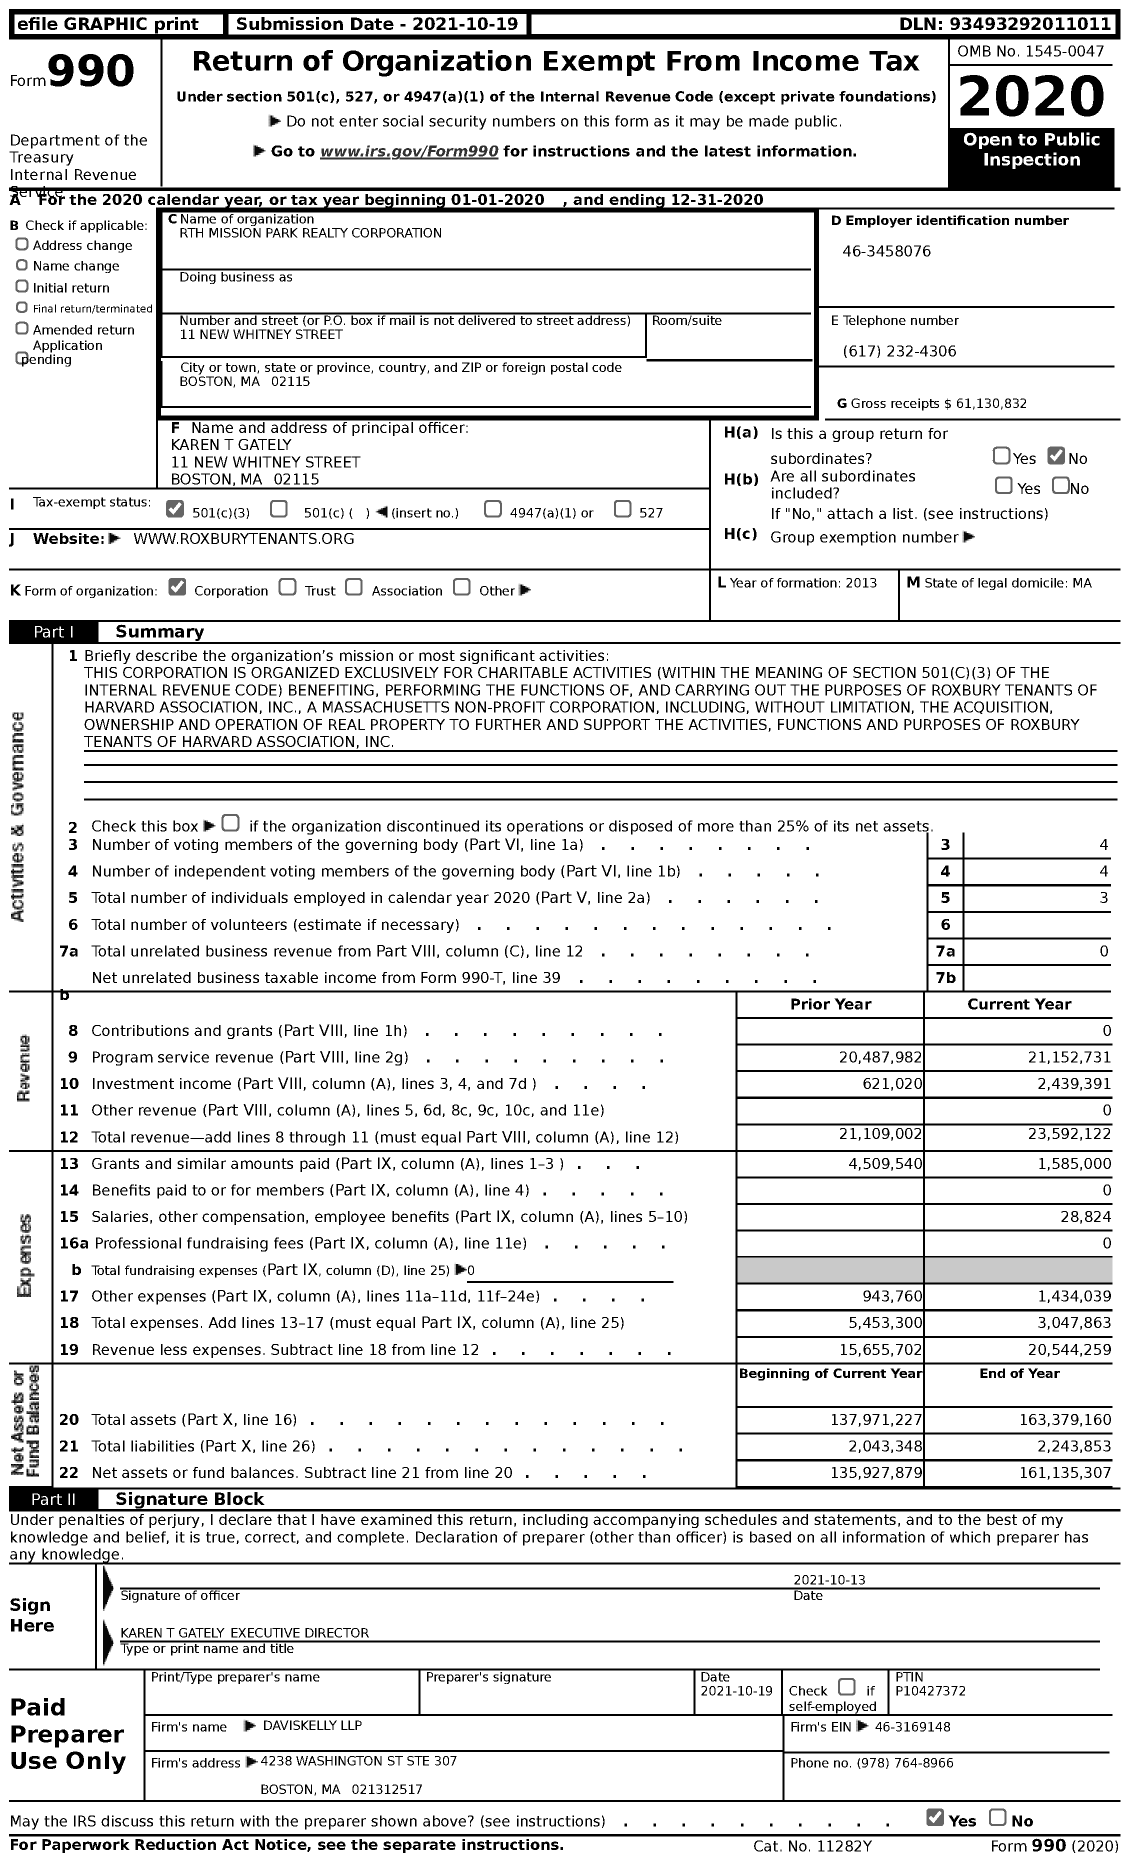 Image of first page of 2020 Form 990 for RTH Mission Park Realty Corporation